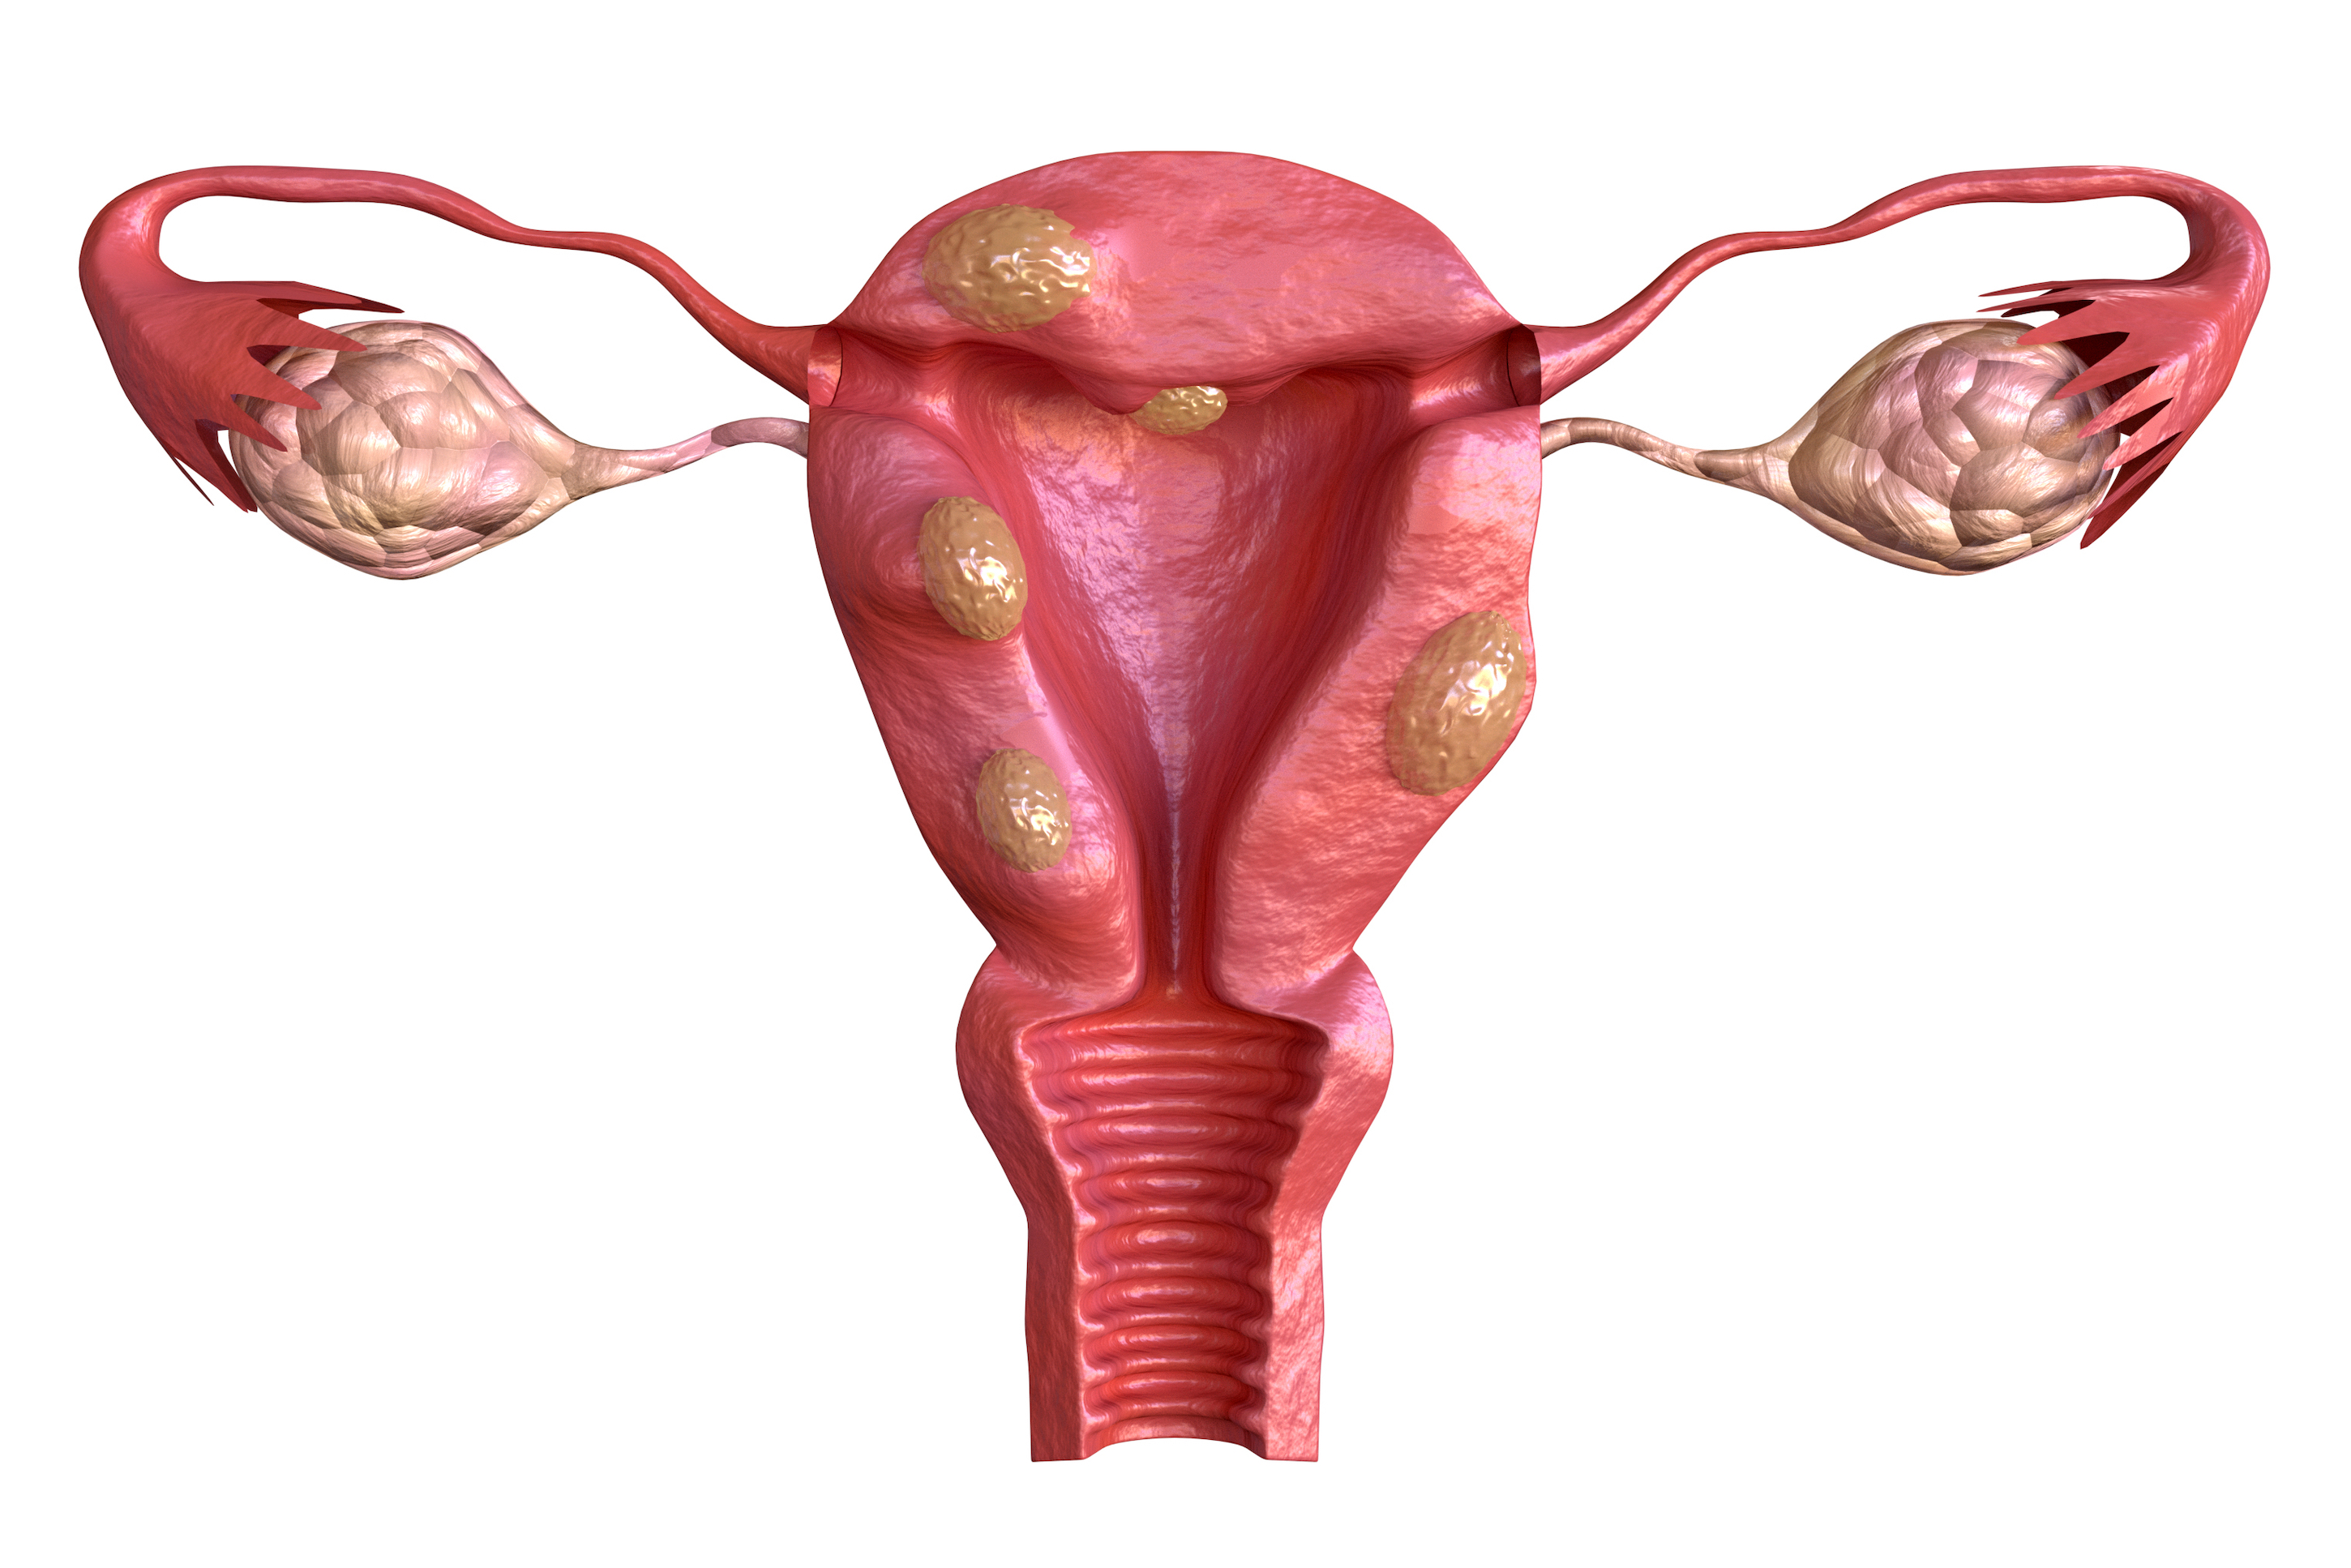 uterine fibroid are benign solid tumors formed by muscle tissue. Its size can vary greatly and some cause large abdomen increase. 3D rendering